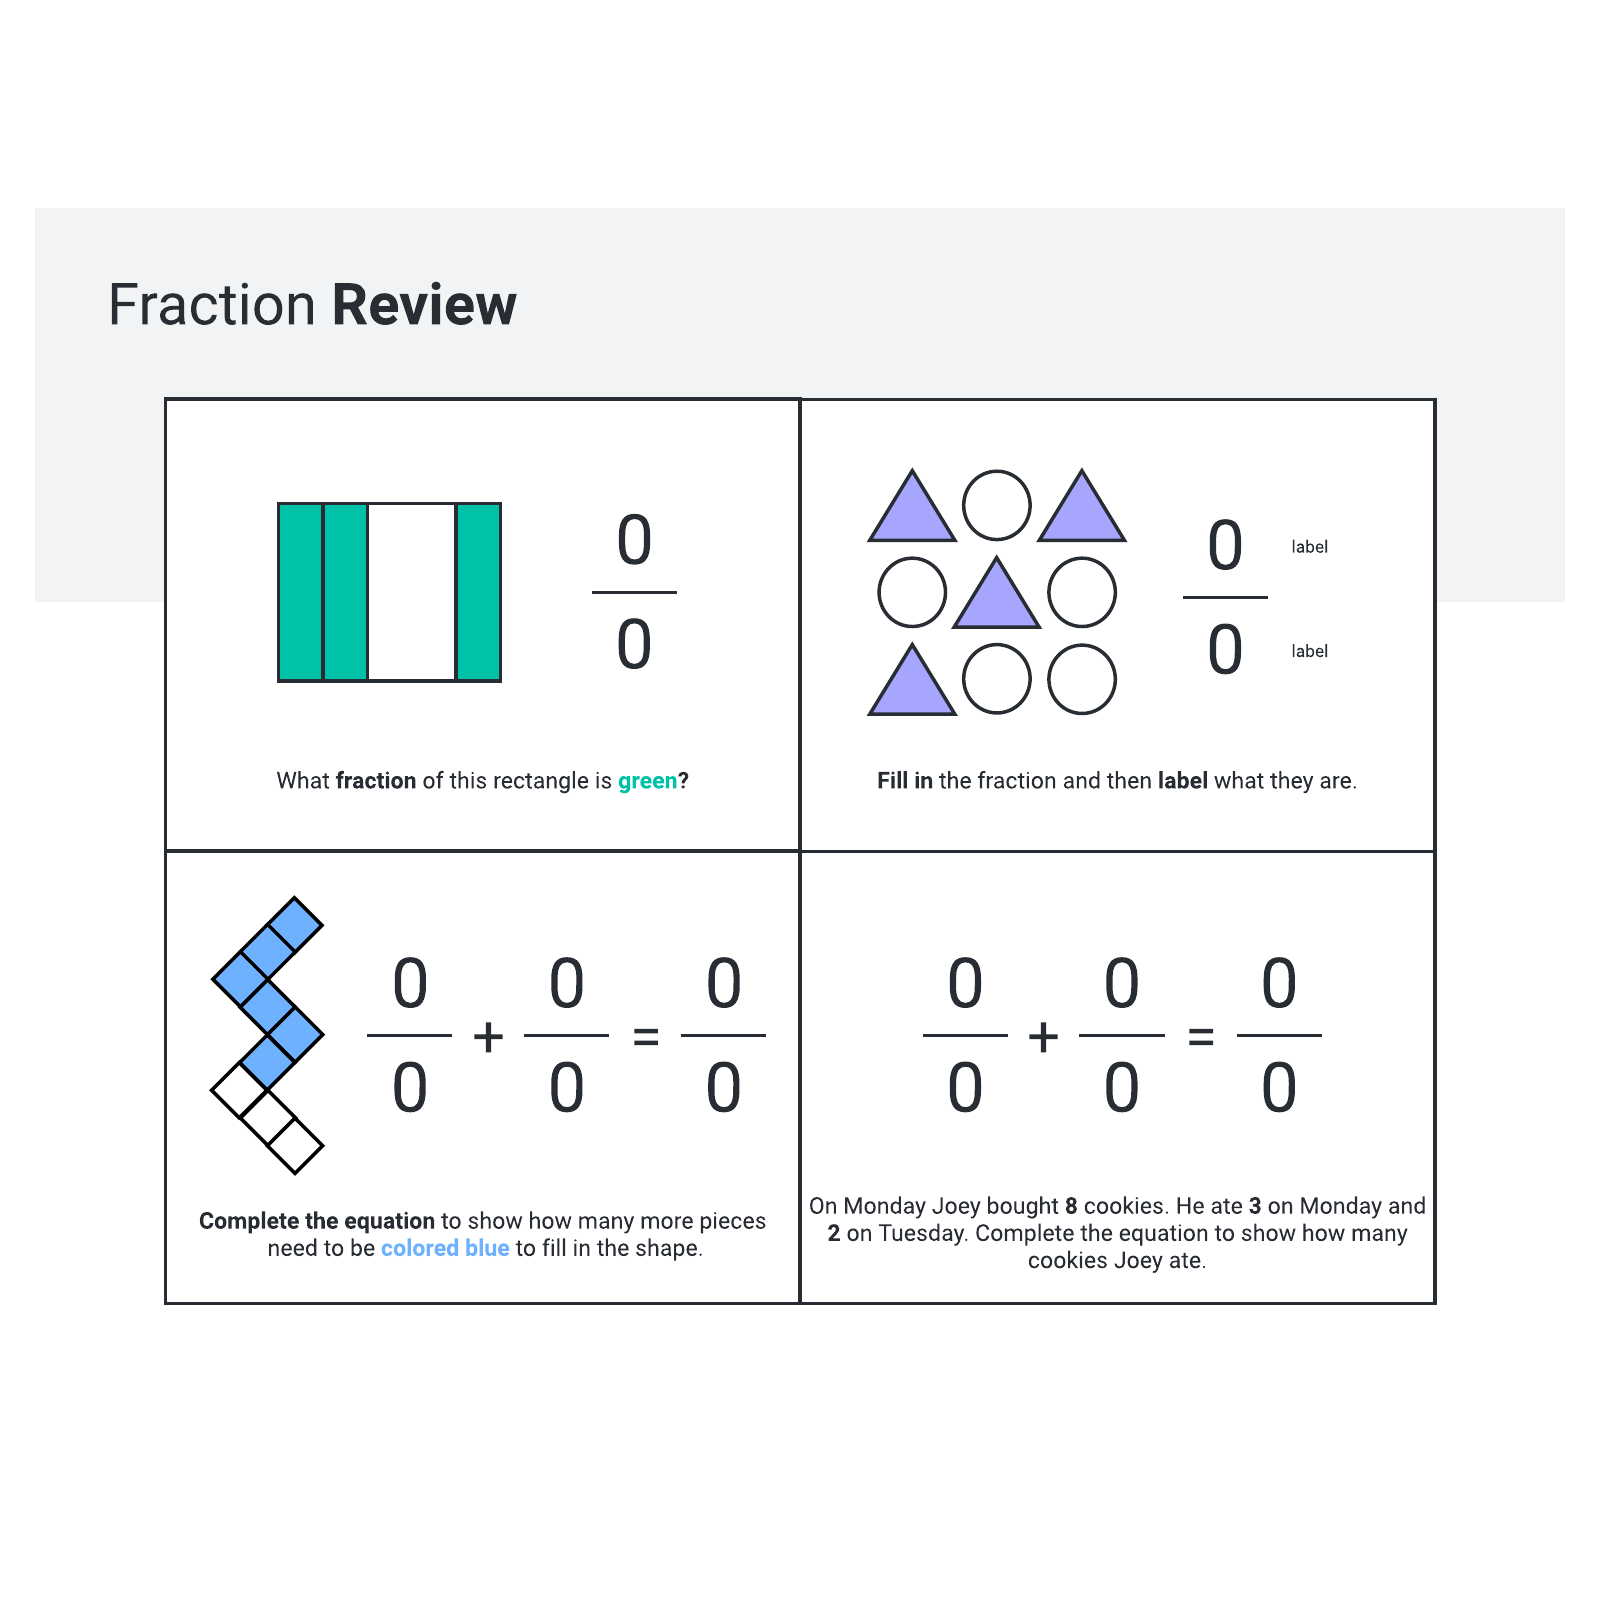 Fraction review example